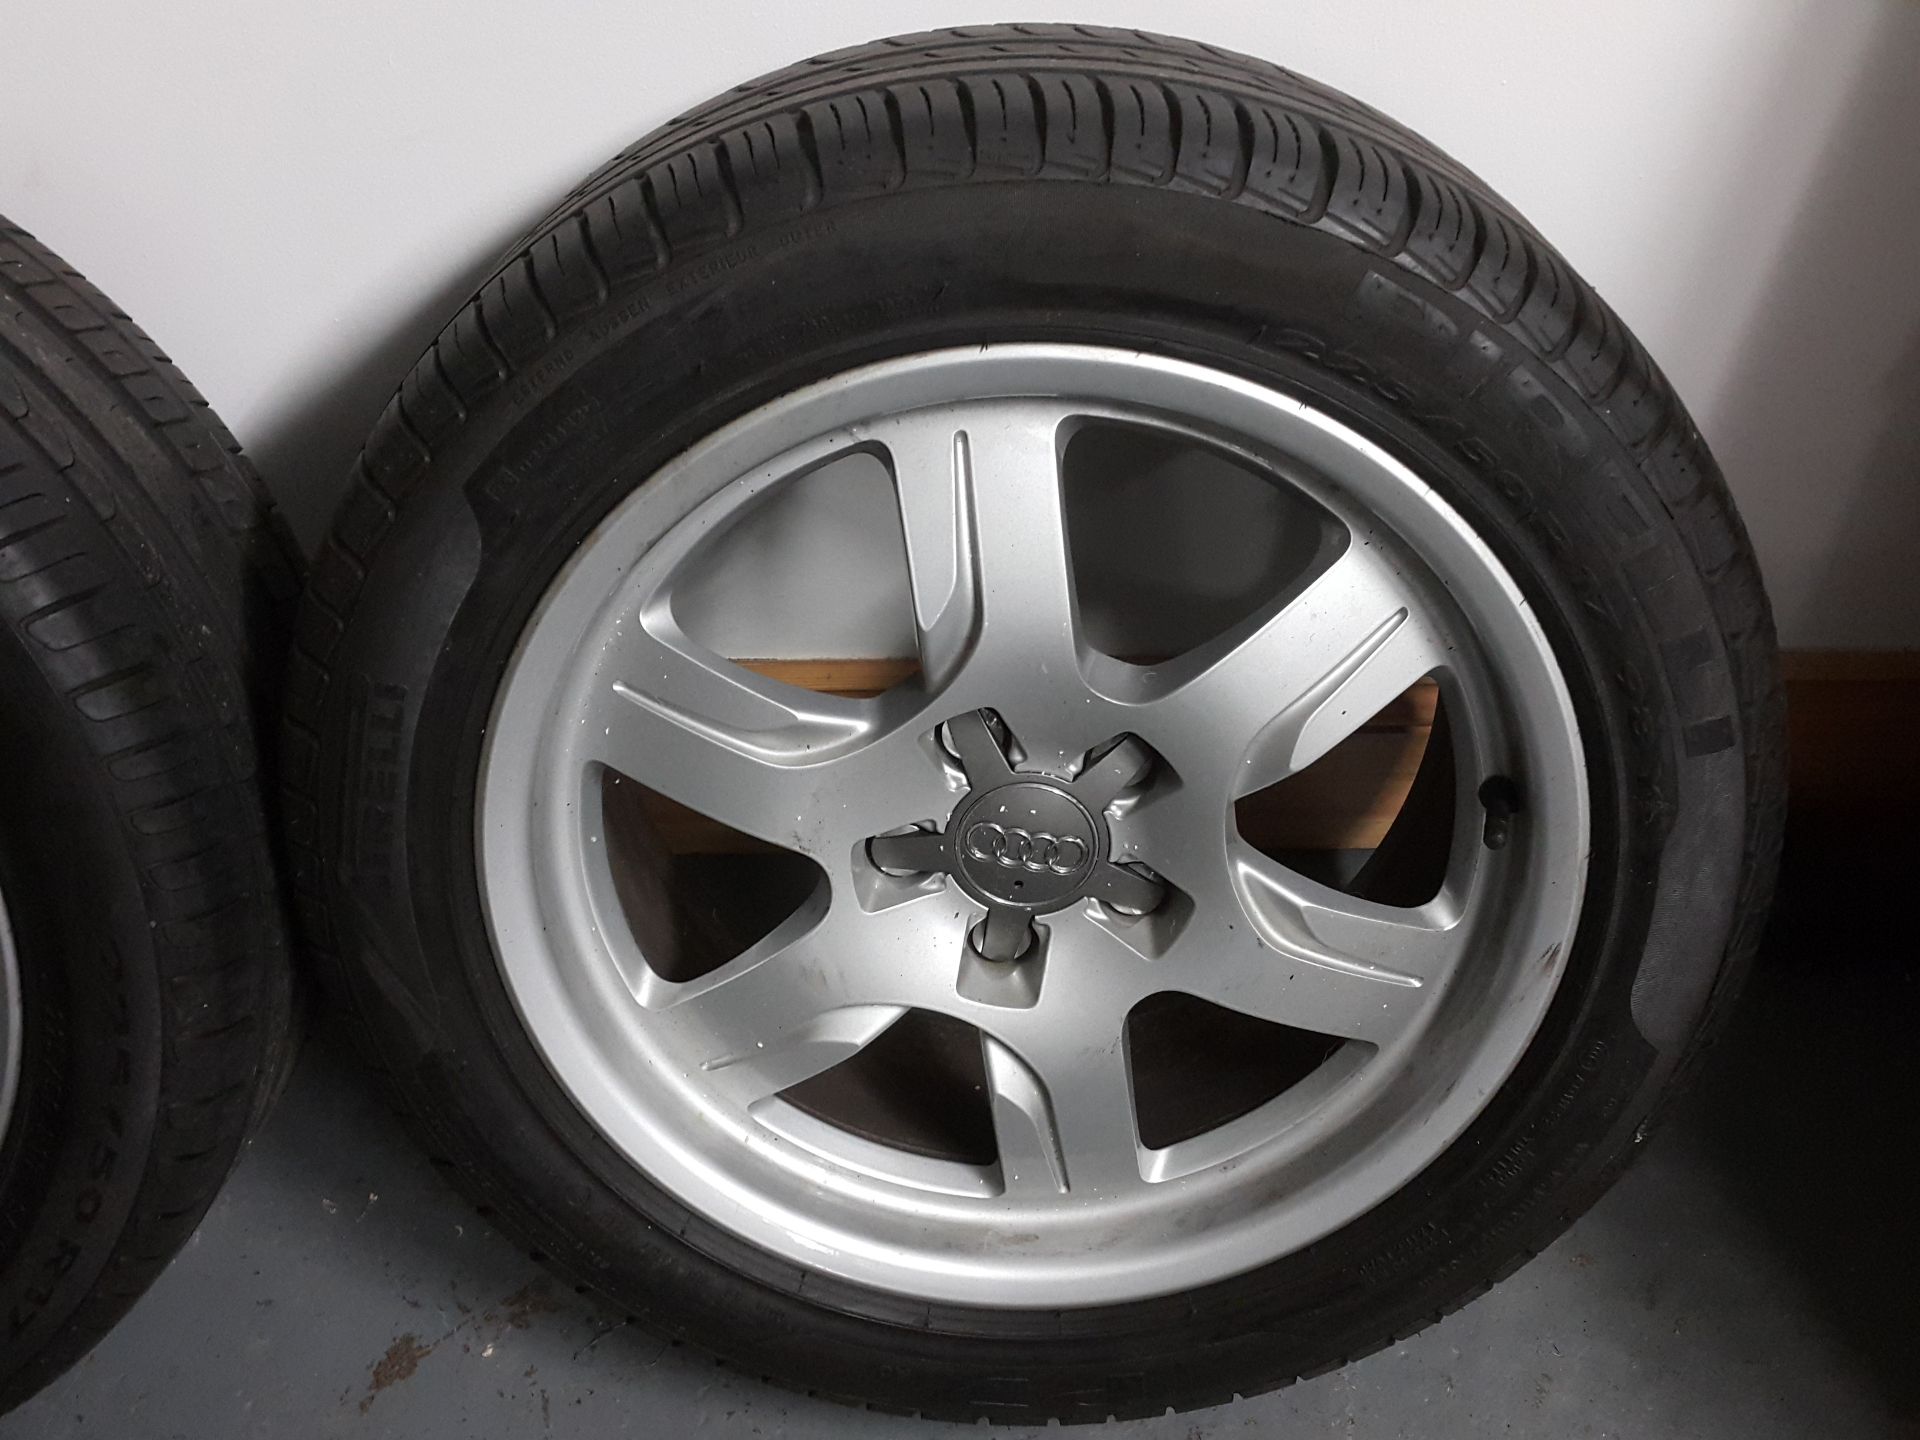 4 X AUDI A5 17" ALLOY WHEELS WITH PIRELLI CINTURATO TYRES 225/50/R17 - Image 6 of 9